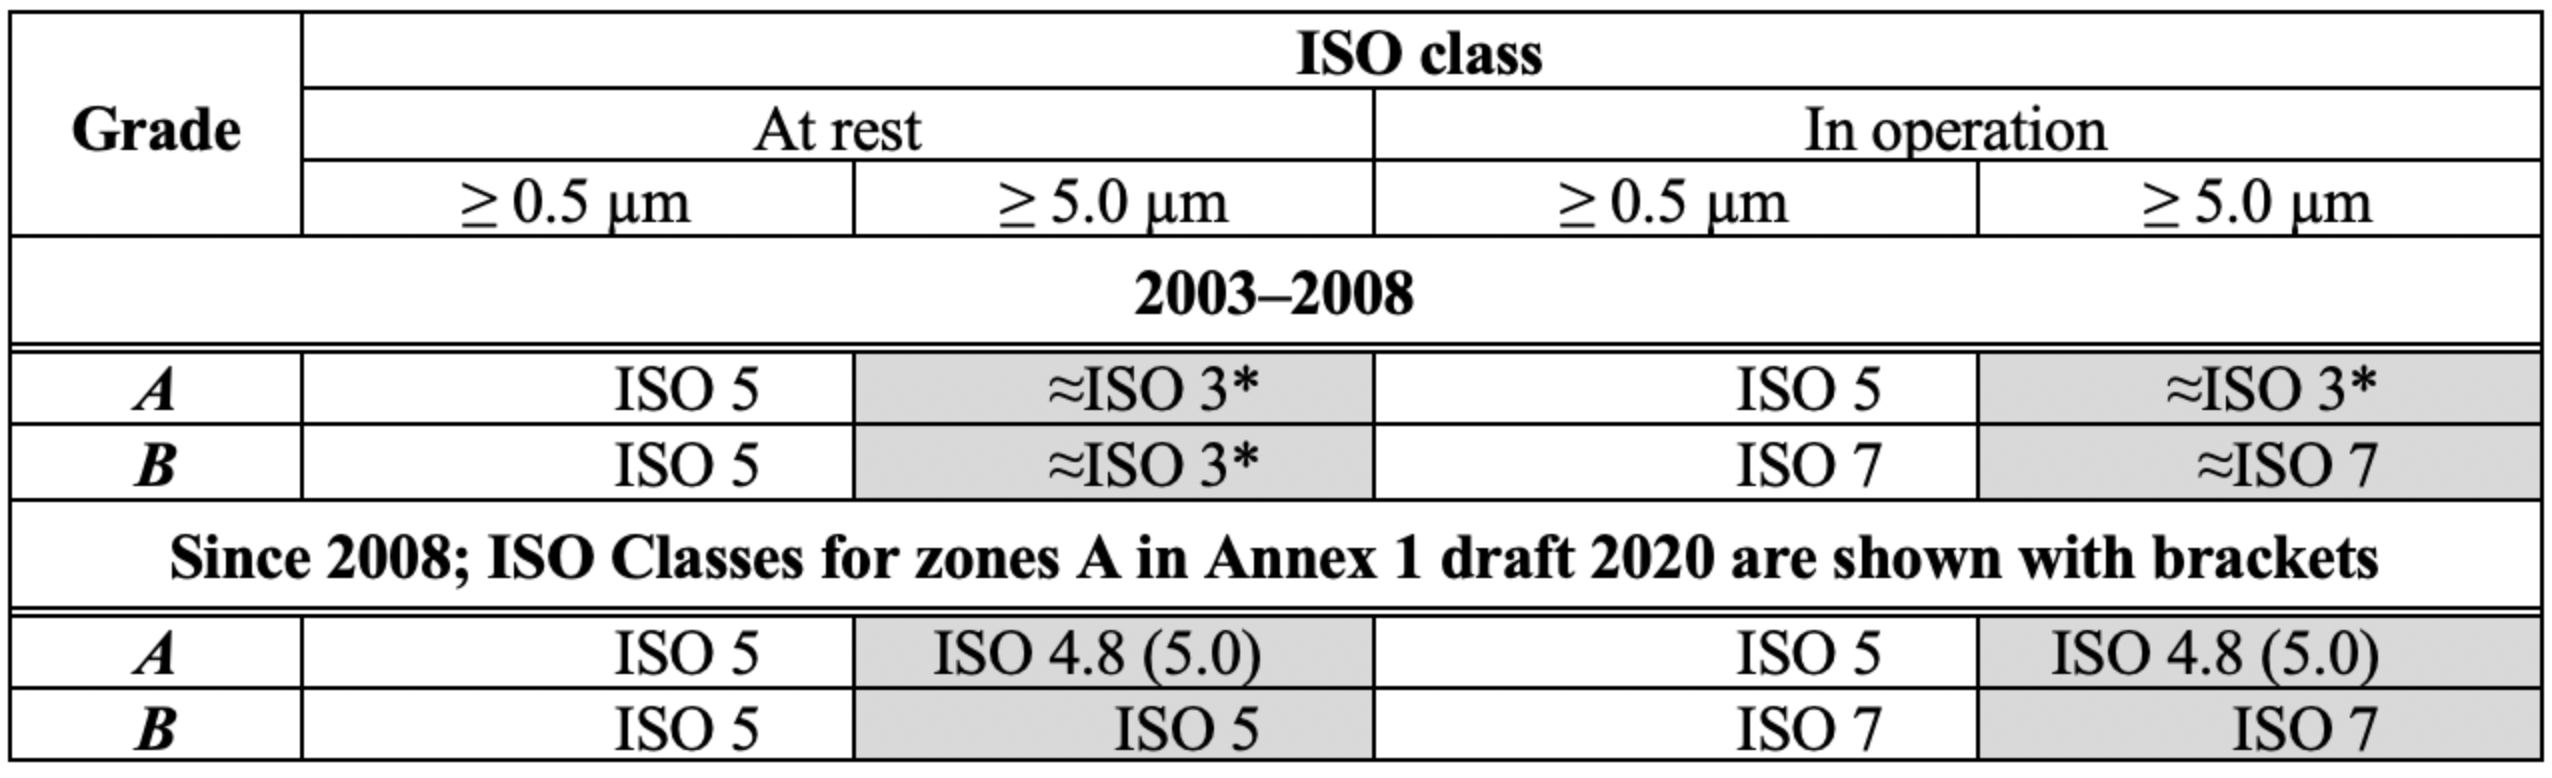 Table 2: Annex 1 limits for particles concentration for Grades A/B presented as ISO classes. * Extrapolation of limits in ISO 14664-1 approximately